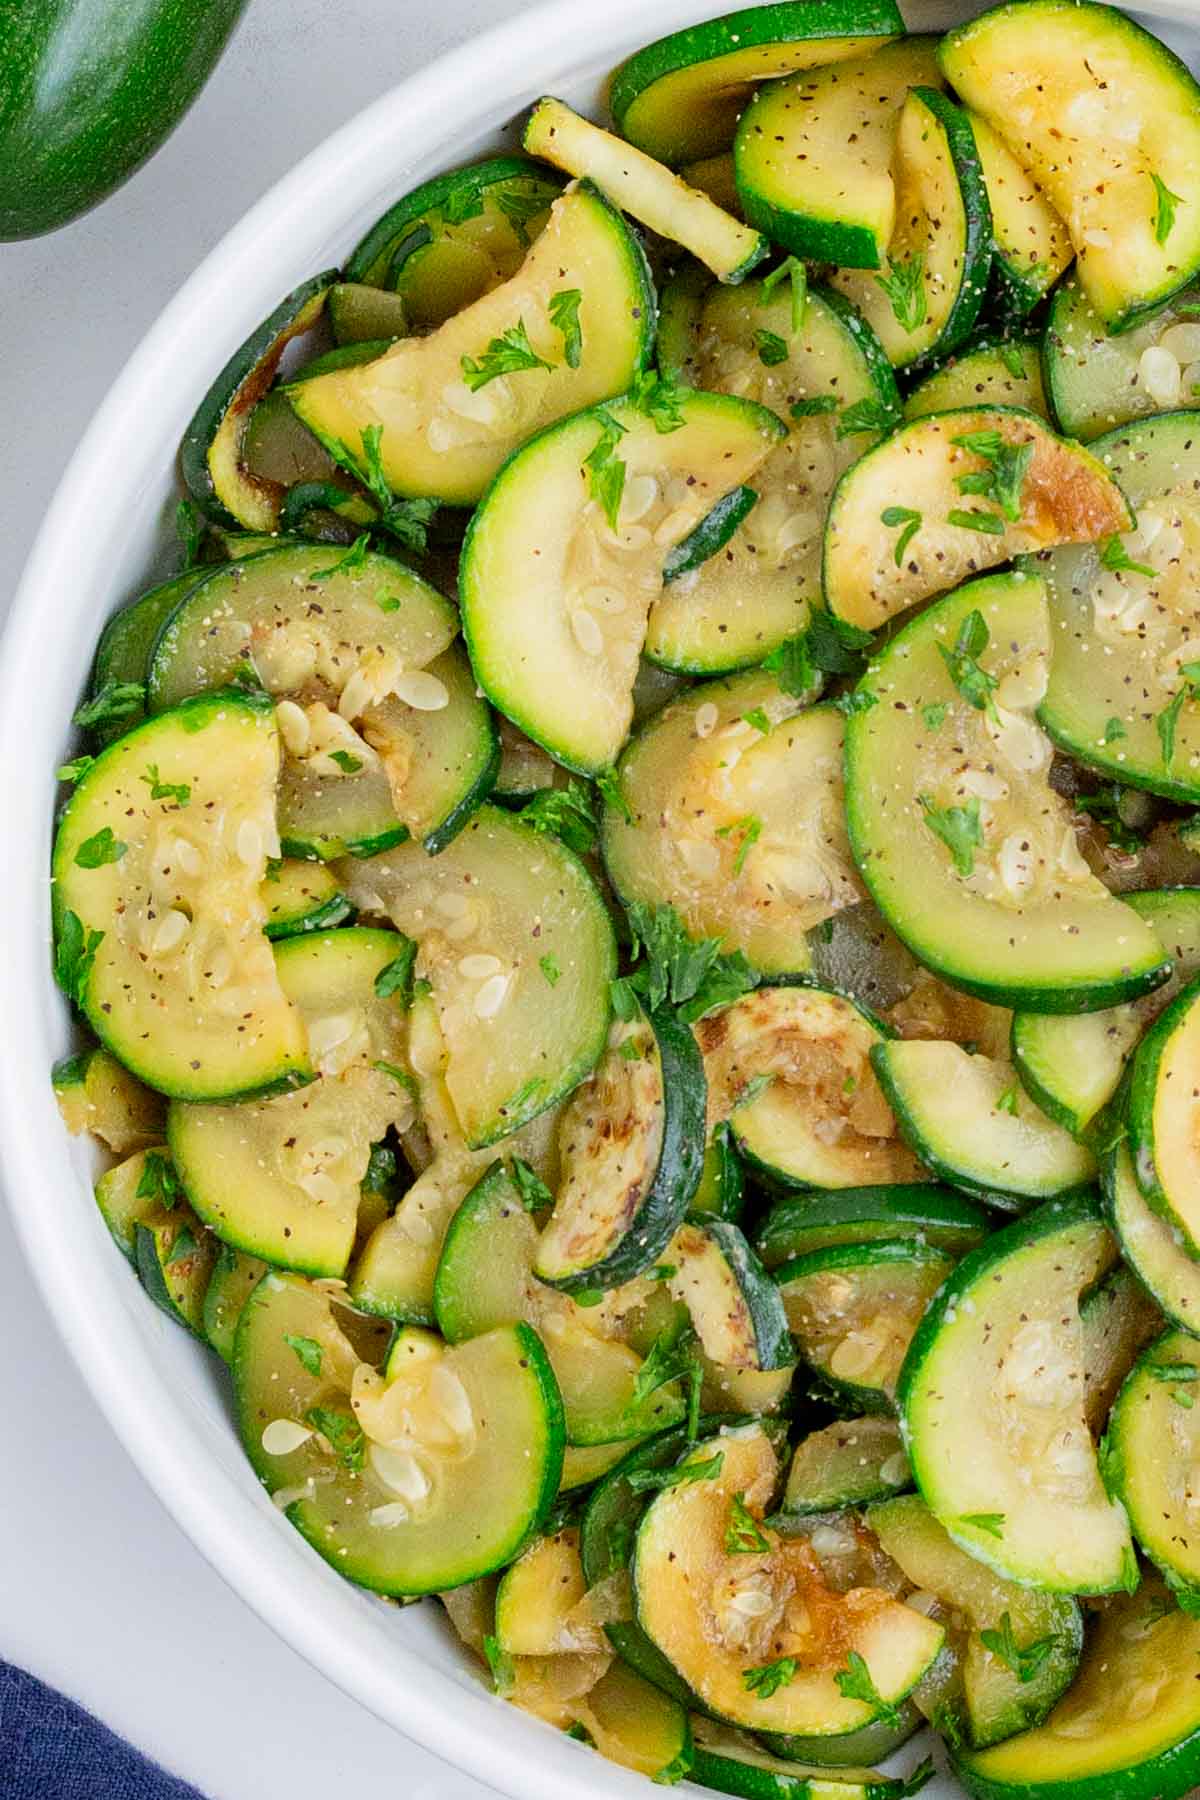 Sauteed zucchini is a quick and easy side dish ready in under 15 minutes.